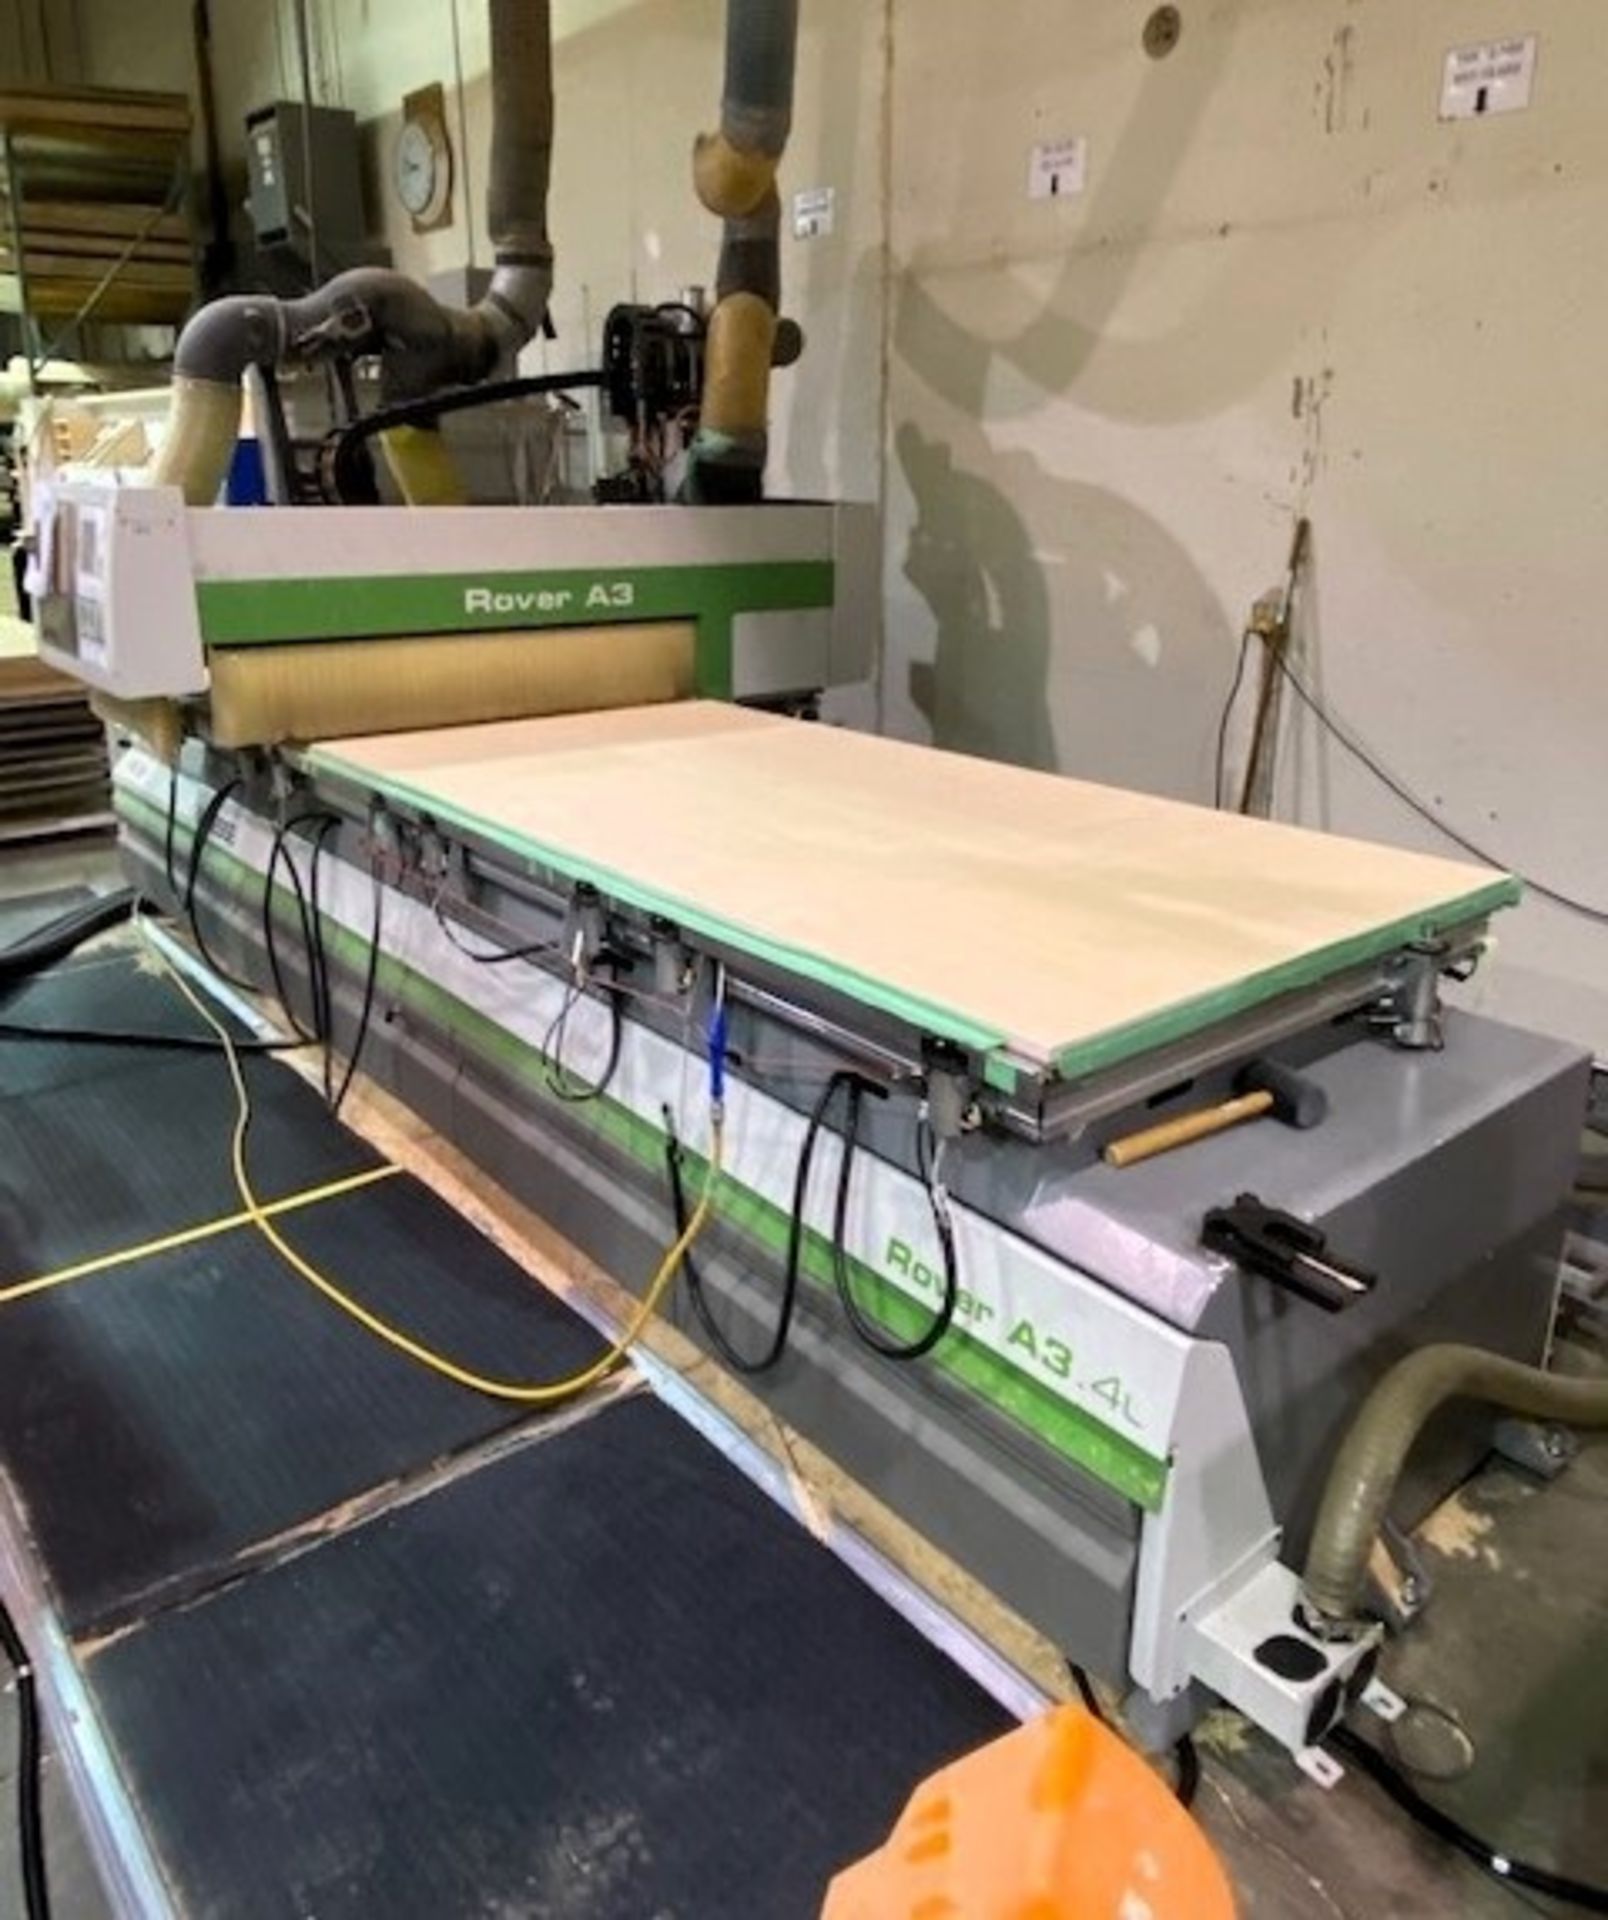 2008 BIESSE ROVER A3.4L CNC ROUTER, 4' X 12' NESTED TABLE, 230V, S/N 33781